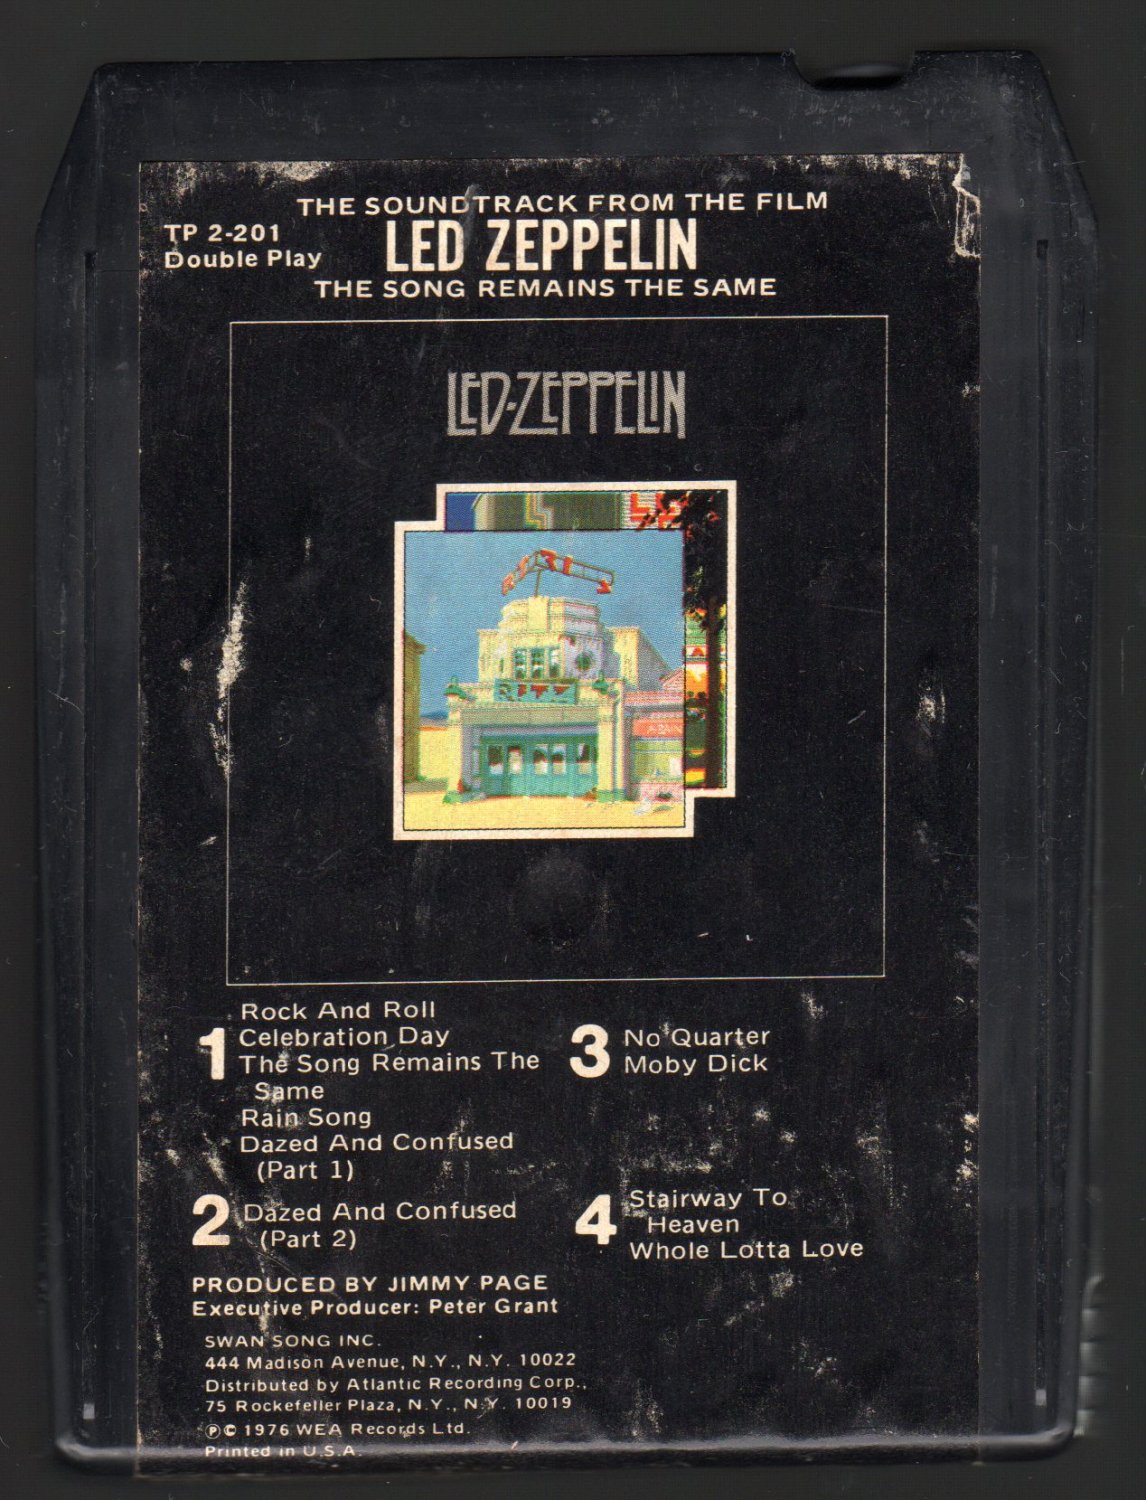 Led Zeppelin - The Song Remains The Same Soundtrack 1976 SWAN SONG